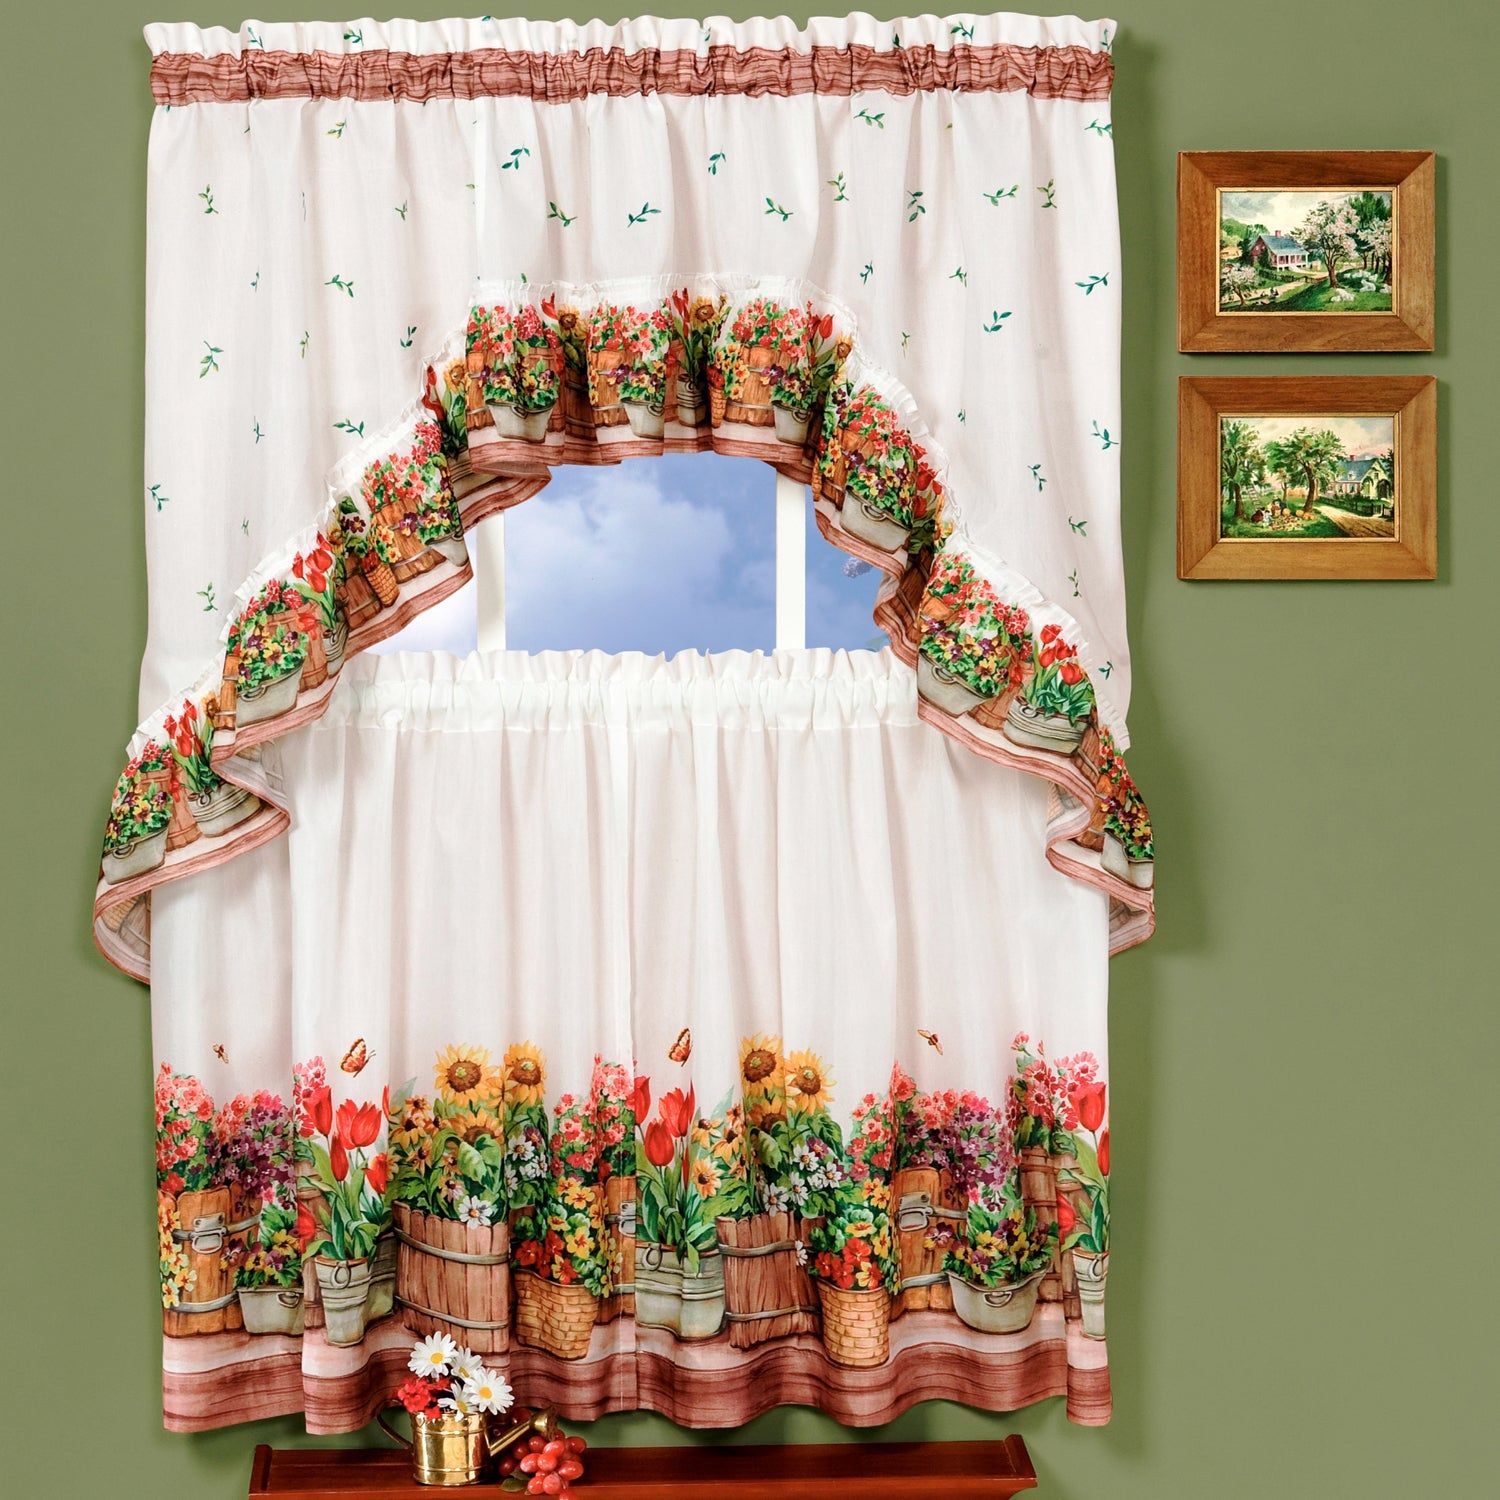 Traditional Two Piece Tailored Tier And Swag Window Curtains Set With  Ornate Flower Garden Print – 36 Inch Pertaining To Traditional Two Piece Tailored Tier And Swag Window Curtains Sets With Ornate Rooster Print (View 2 of 20)